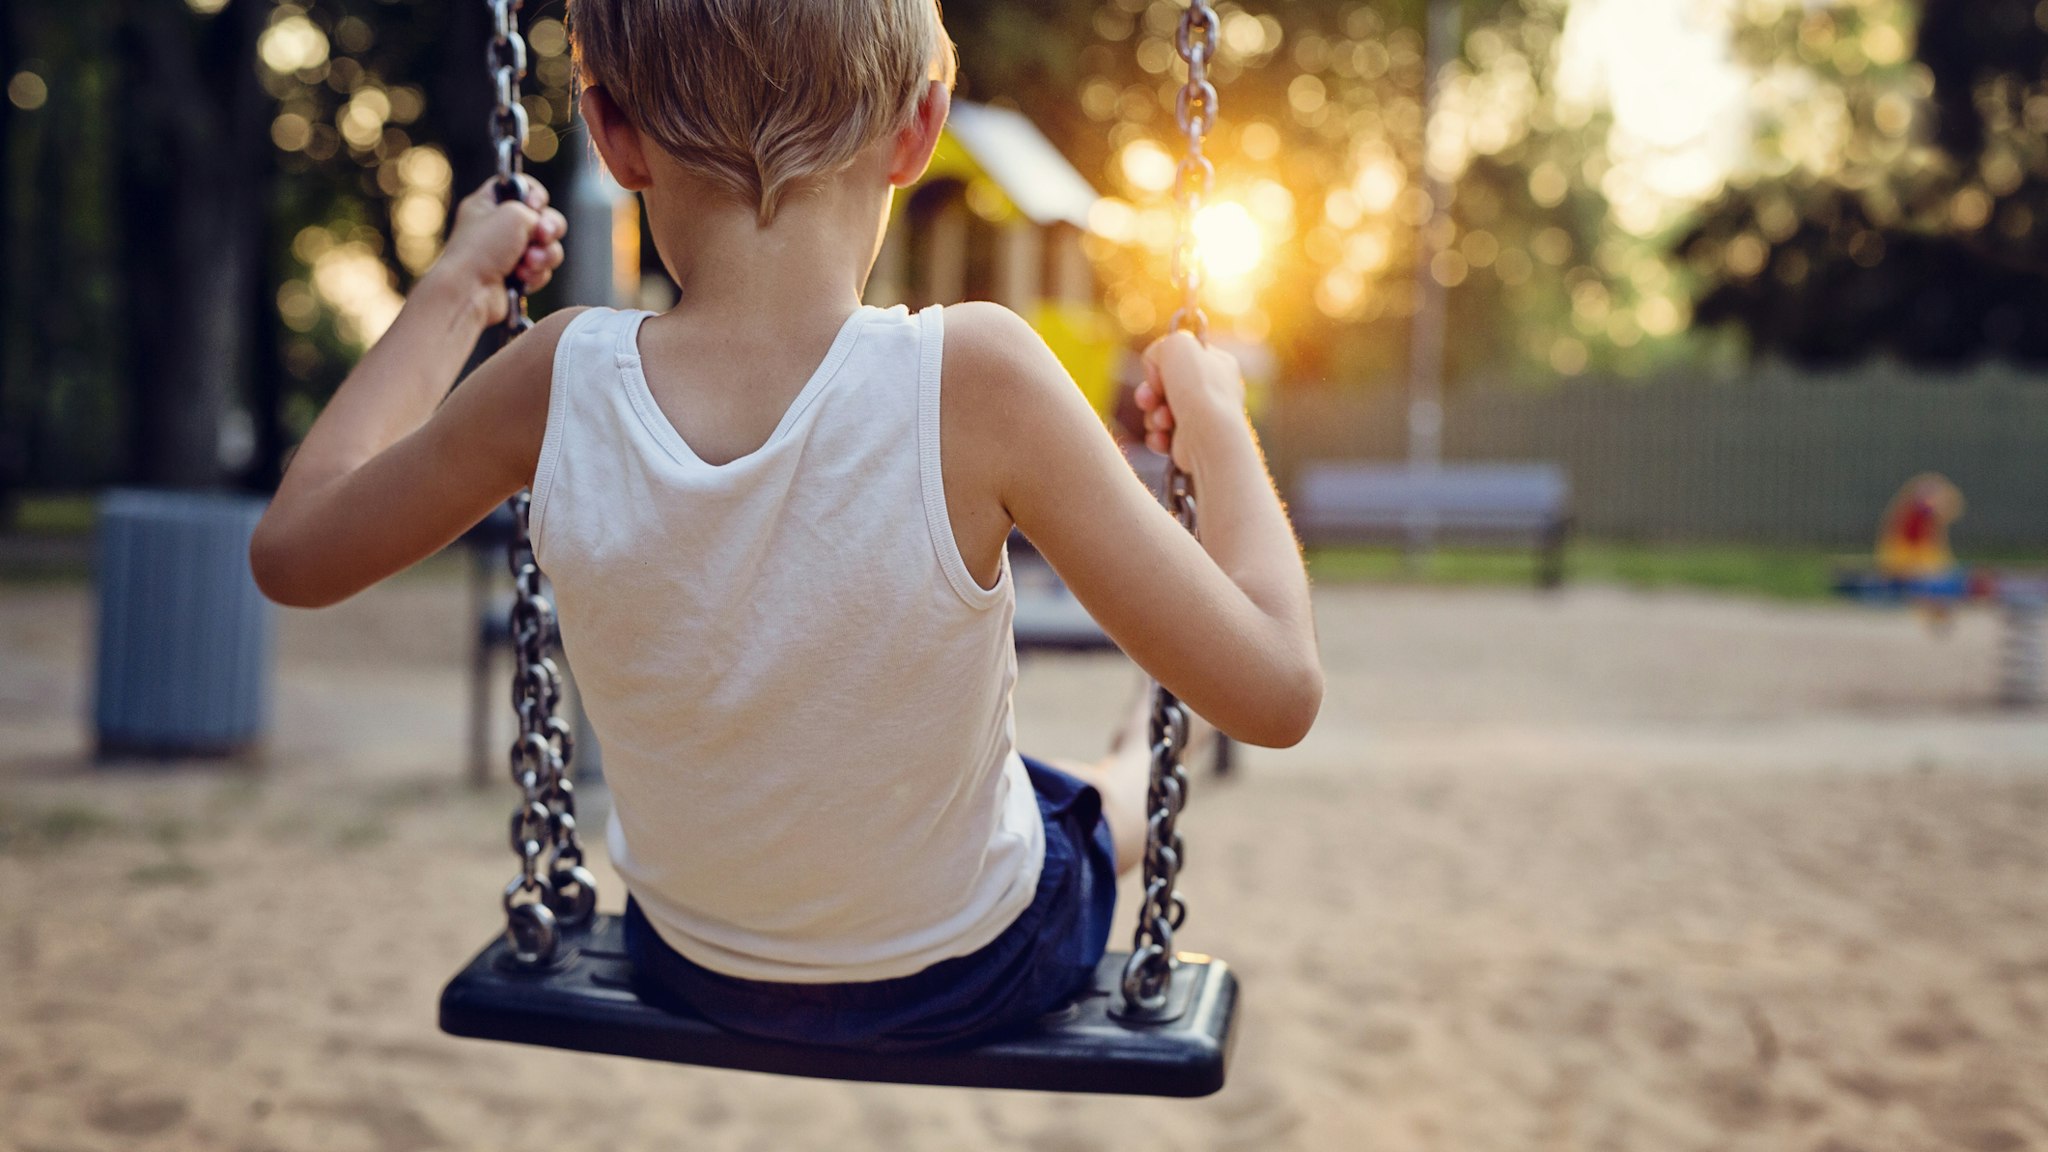 Young boy on swing - stock photo